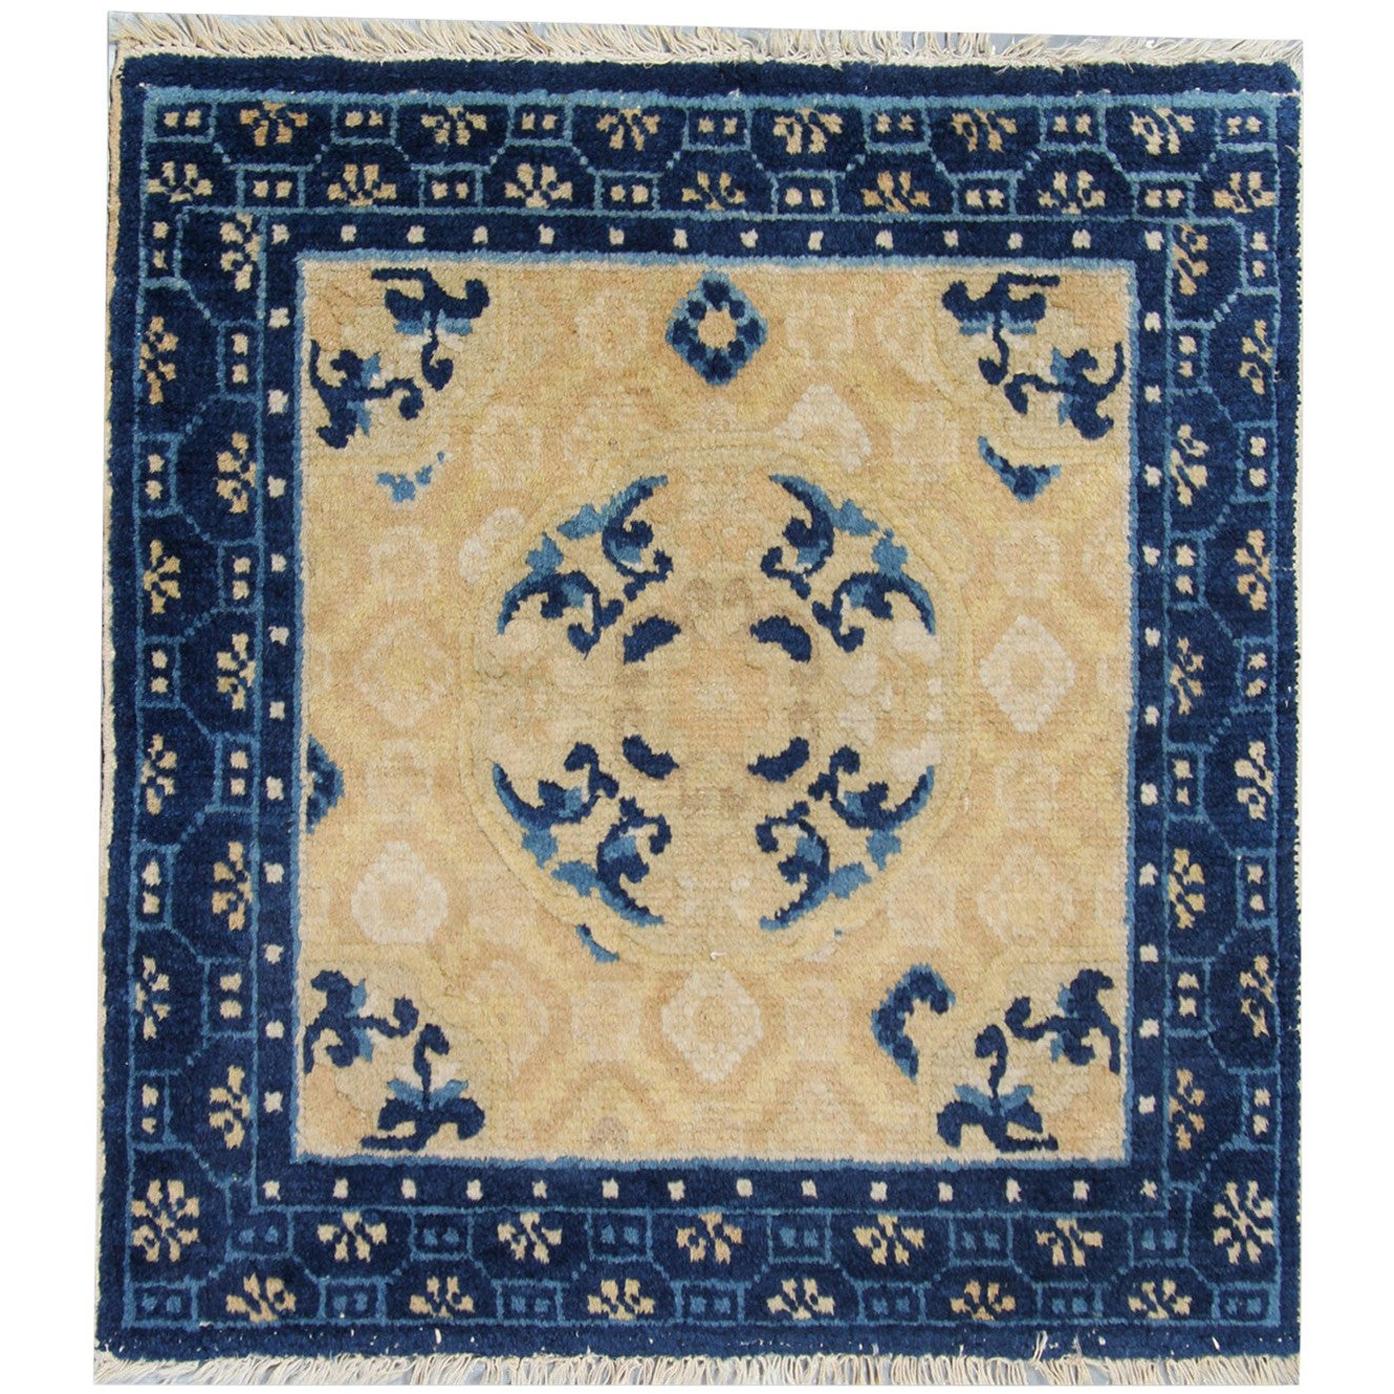 Antique Rug Chinese Rug, Small Handmade Carpet Square Rug, Art Deco Collectible